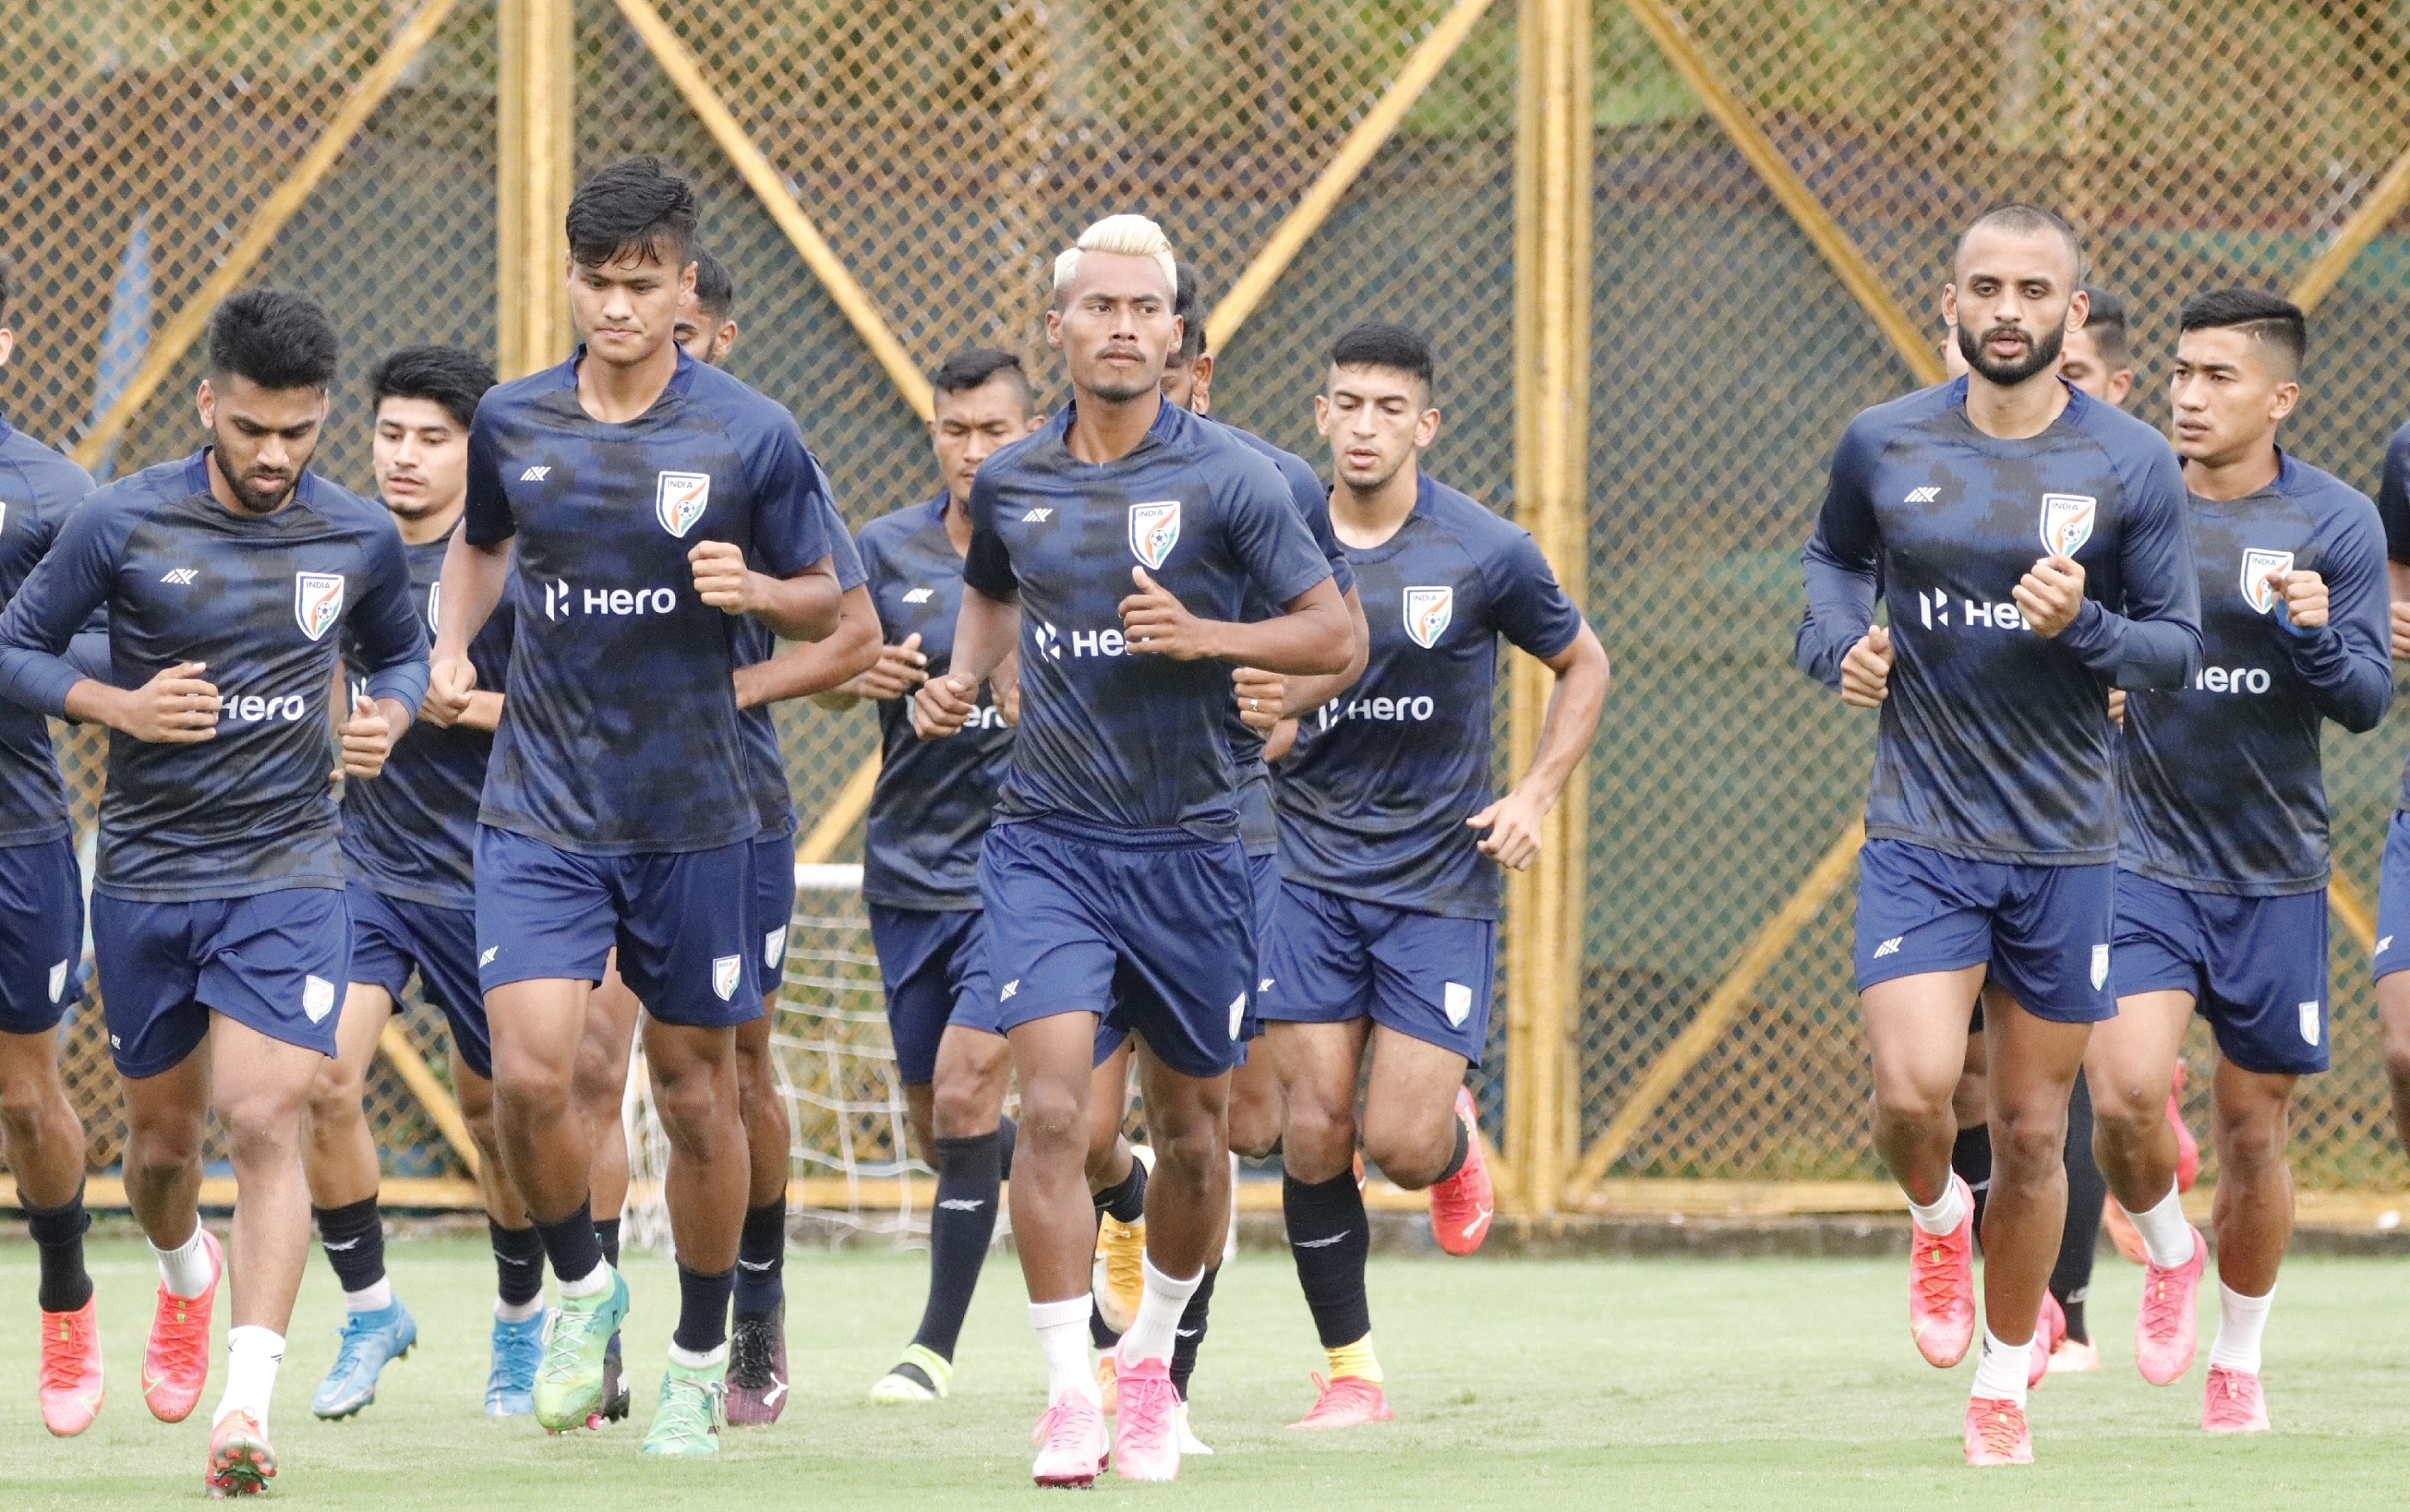 Indio to kick-off SAFF Championship campaign against Bangladesh on October 3